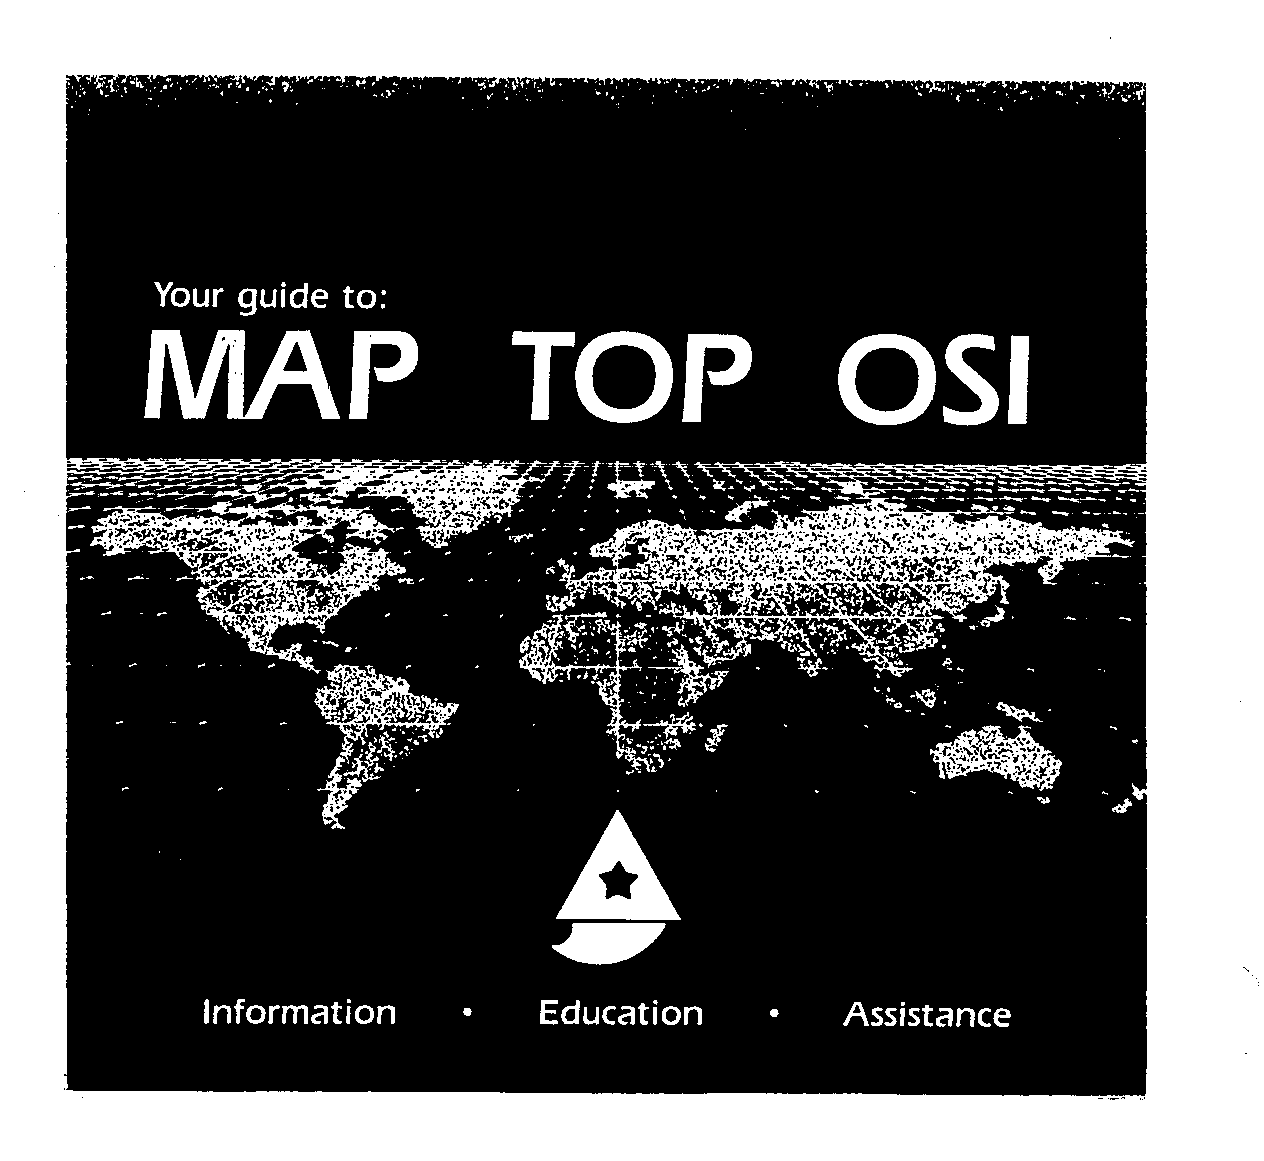  YOUR GUIDE TO: MAP TOP OSI INFORMATION EDUCATION ASSISTANCE